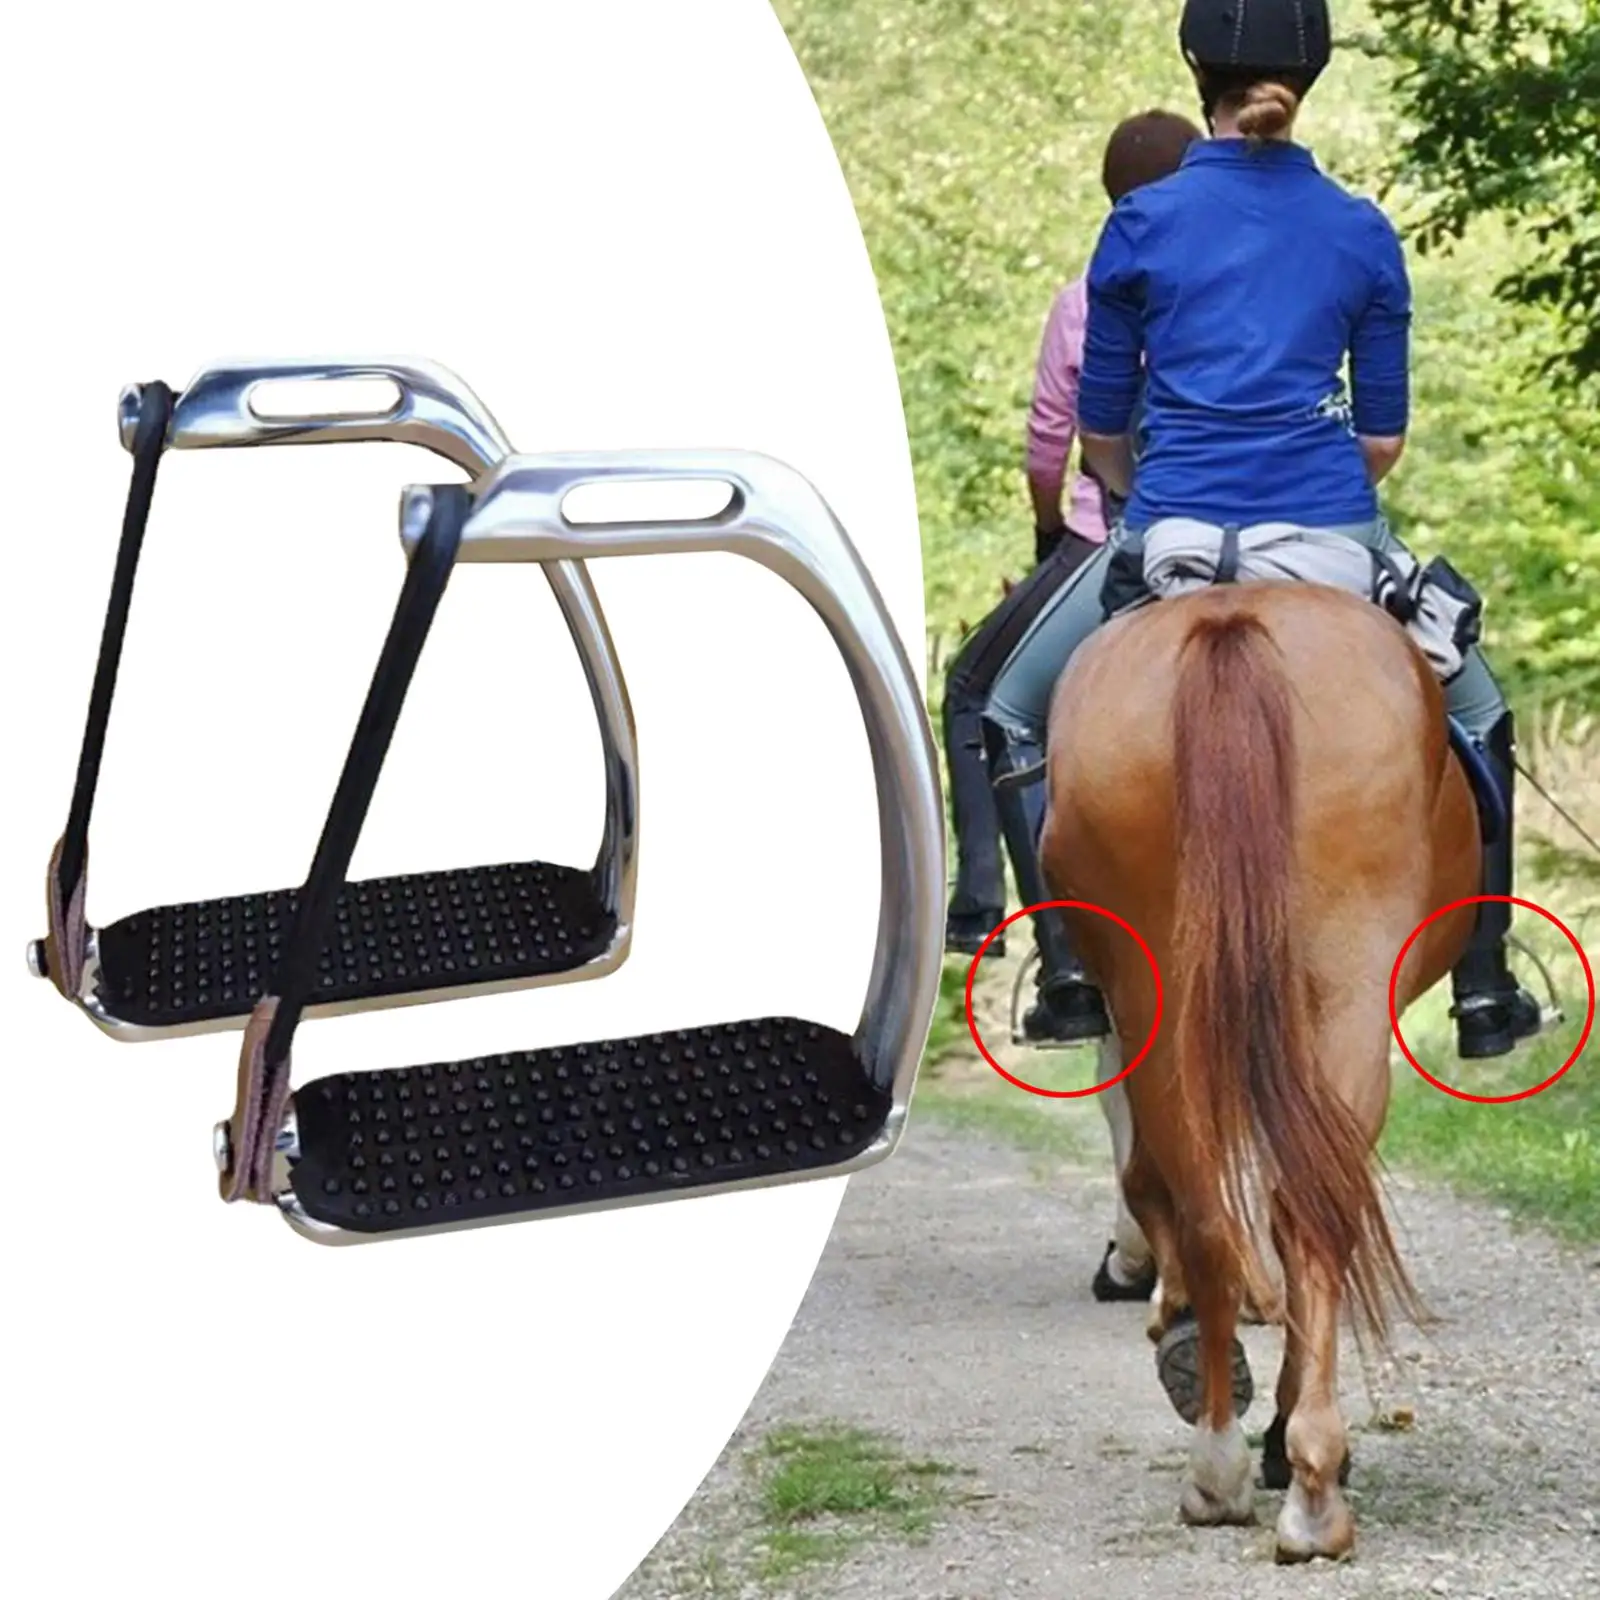 Horse Riding Stirrups Protection Saddle Tool 2Pieces Safety Stirrup for Equestrian Sports Outdoor Western Riding Racing Adults